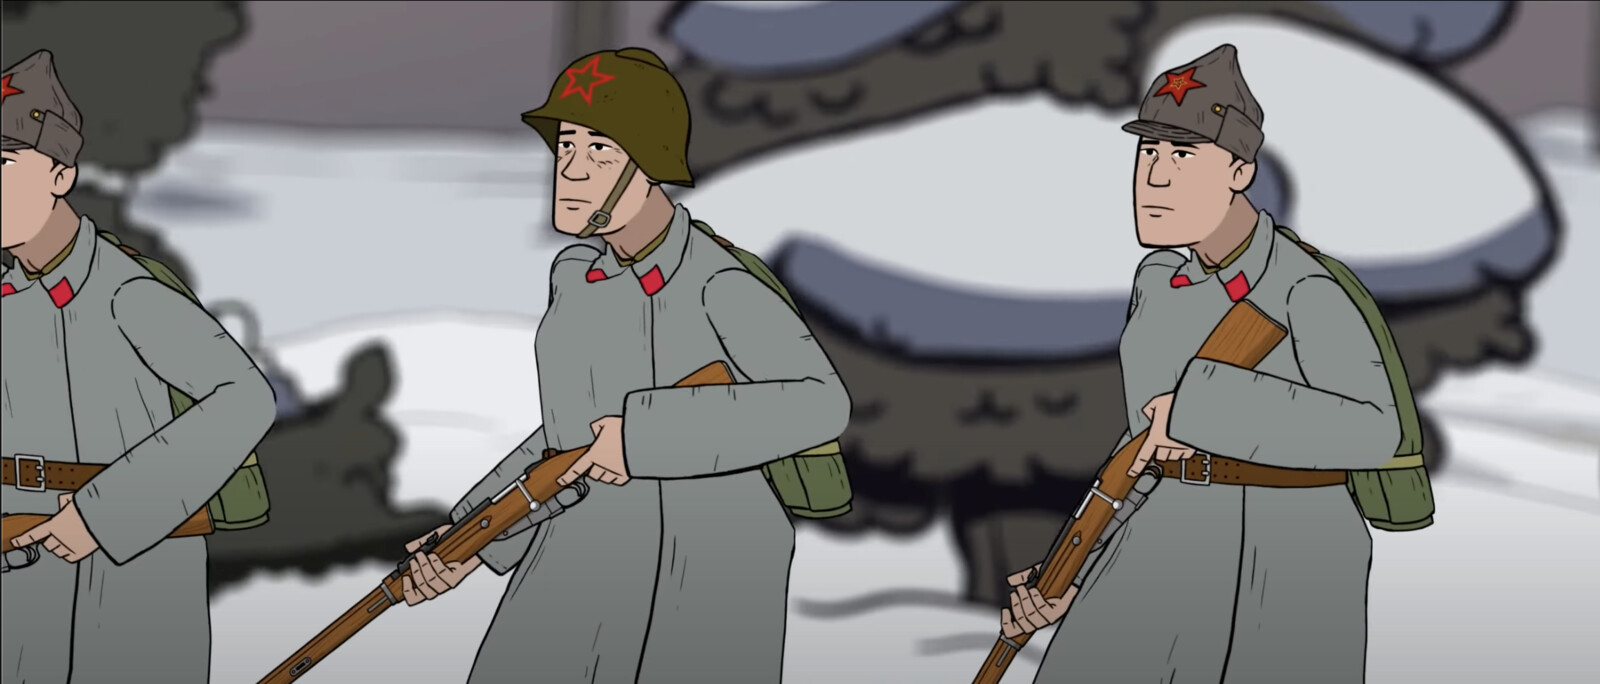 Screenshot from Final - Art by the Illustration and Animation Teams